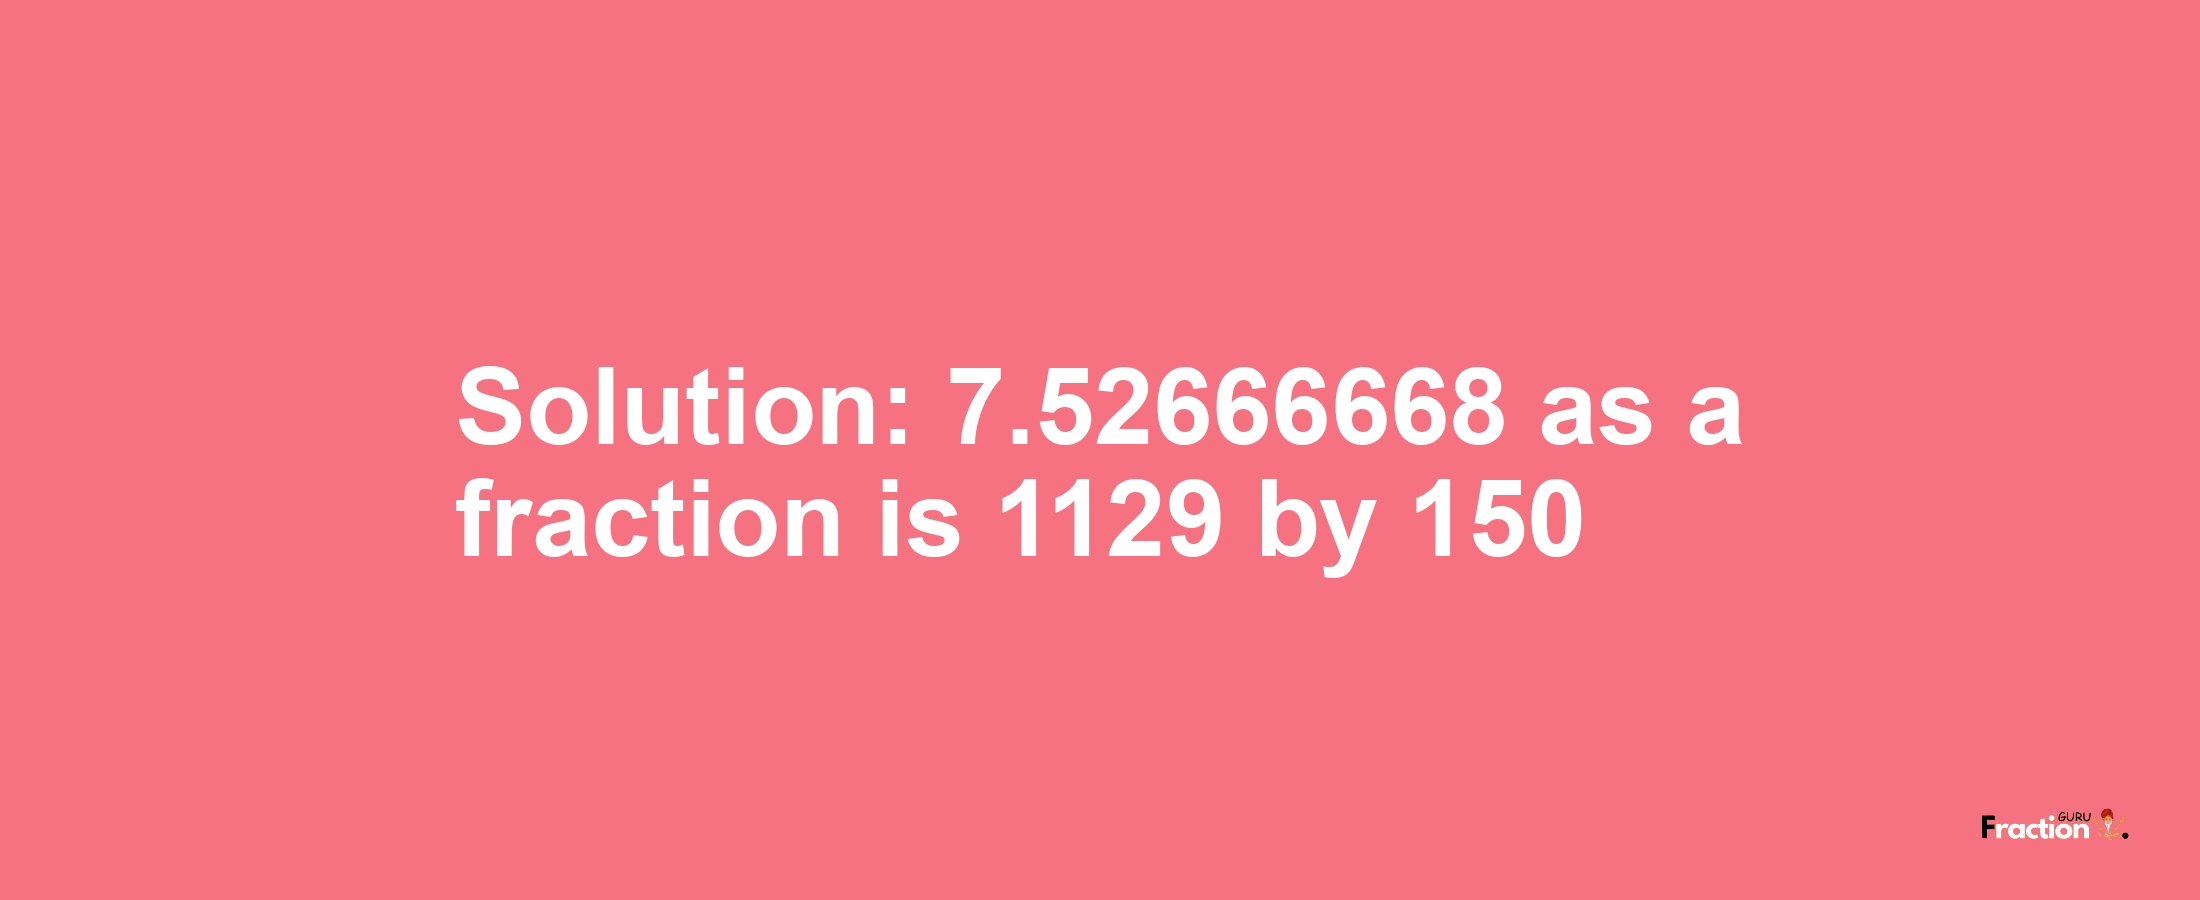 Solution:7.52666668 as a fraction is 1129/150